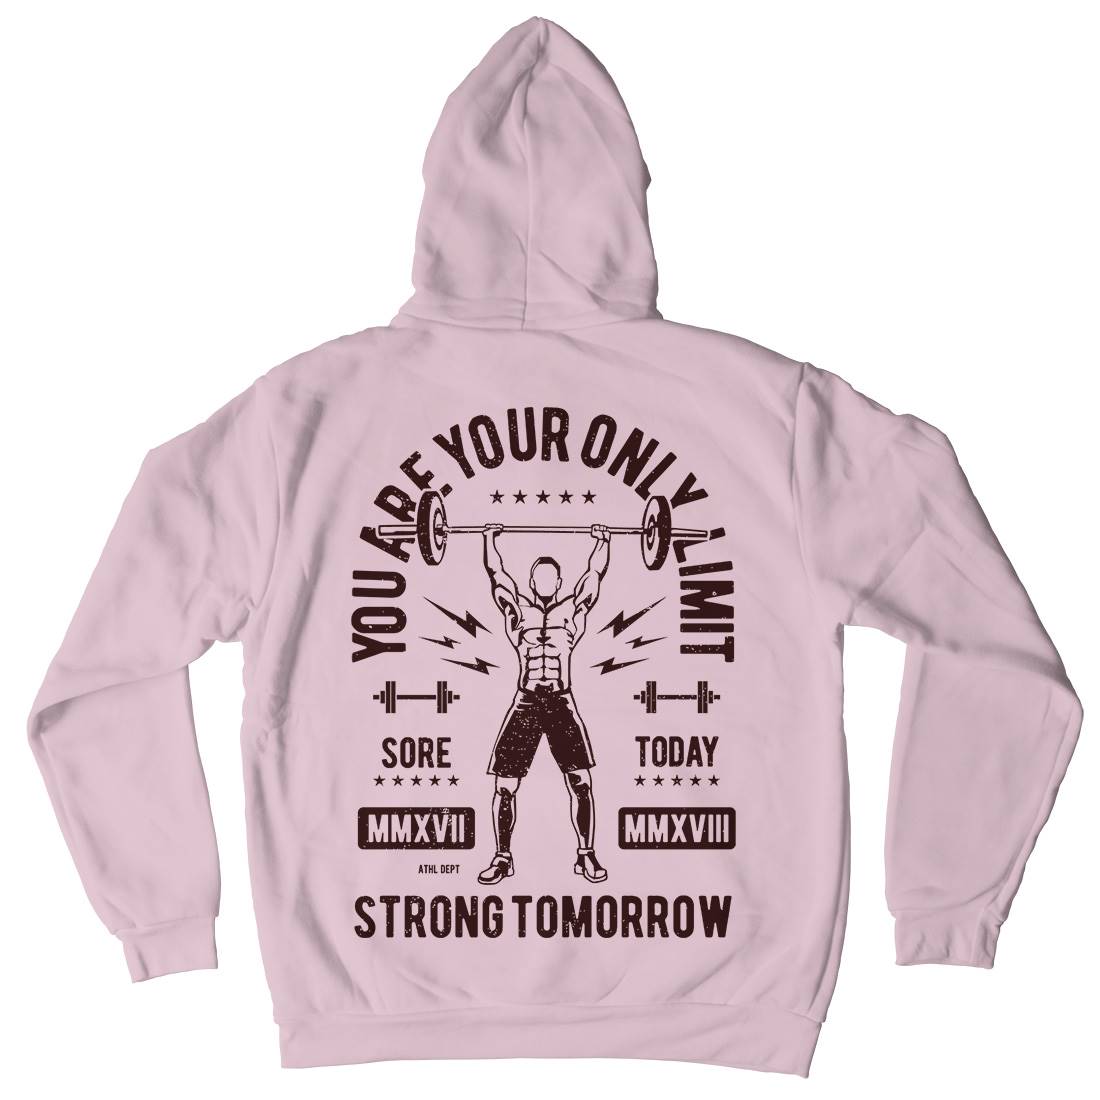 You Are Your Only Limit Kids Crew Neck Hoodie Gym A799